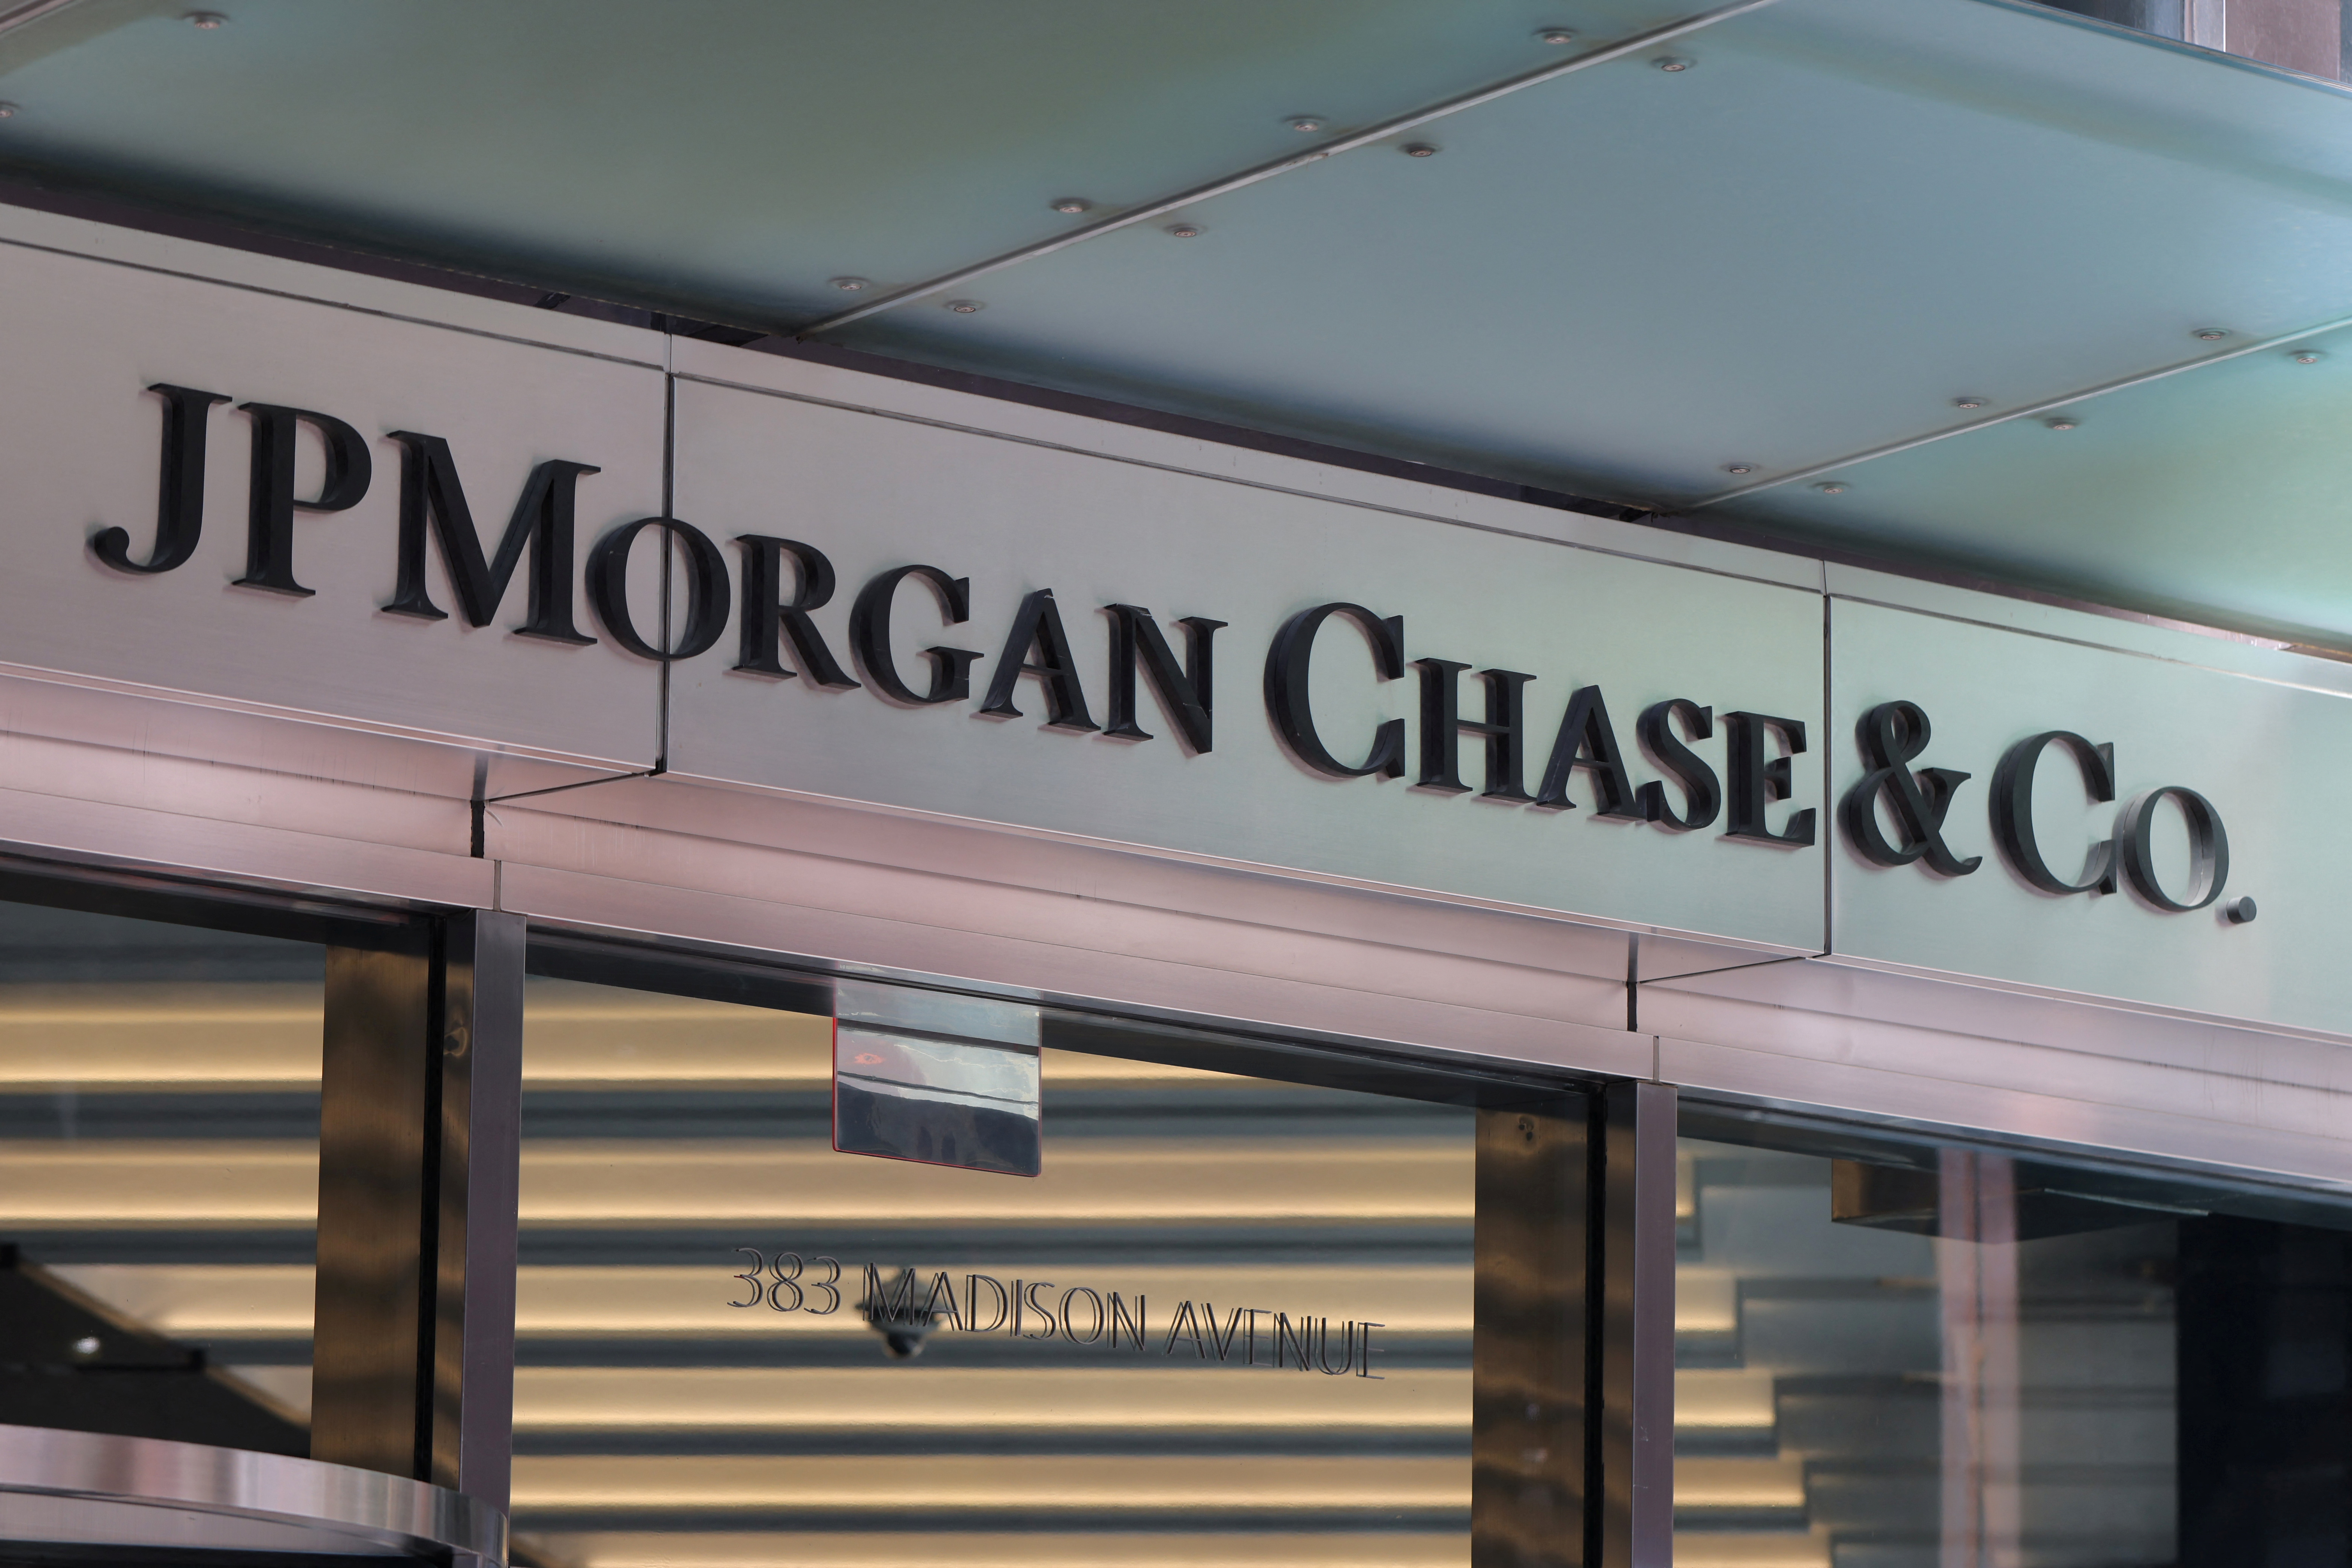 Signage is seen at the JPMorgan Chase & Co. New York Head Quarters in Manhattan, New York City